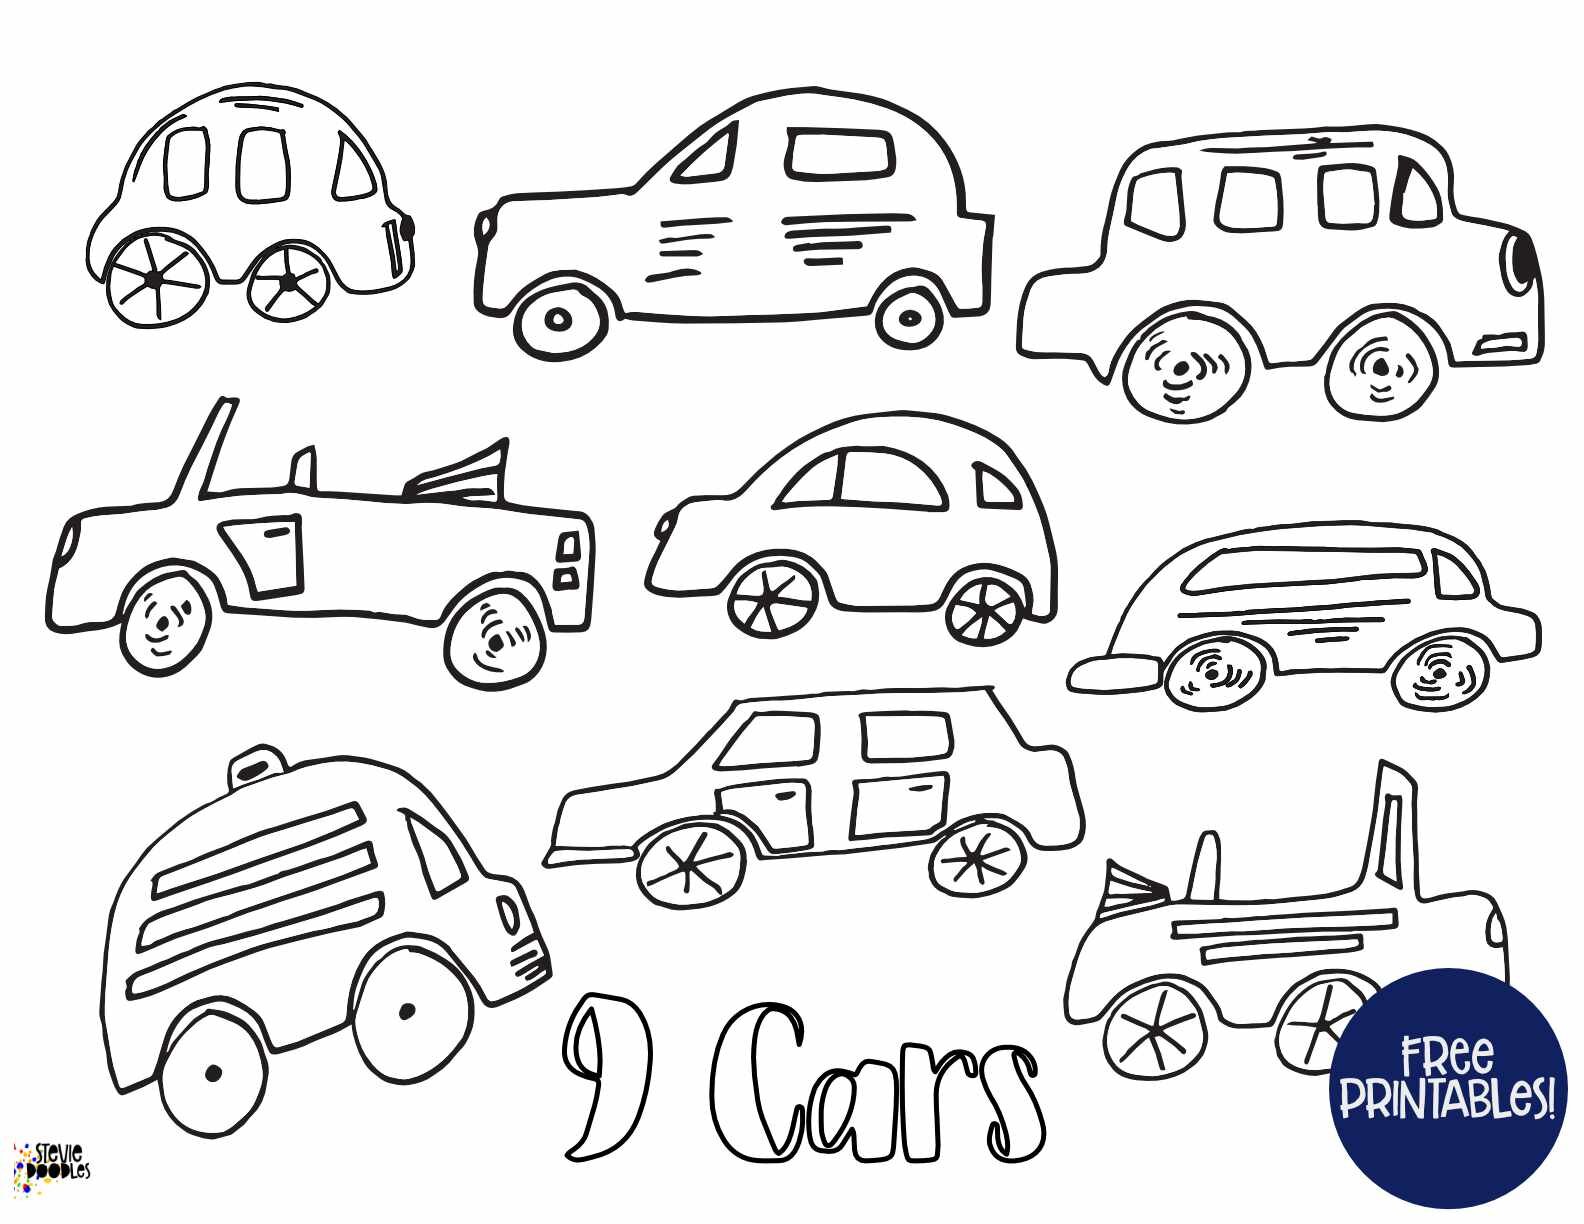 10 free vehicle coloring pages - cars, trucks, boats, helicopters, plans, buses! Numbers 1-10 for preschool/kindergarten